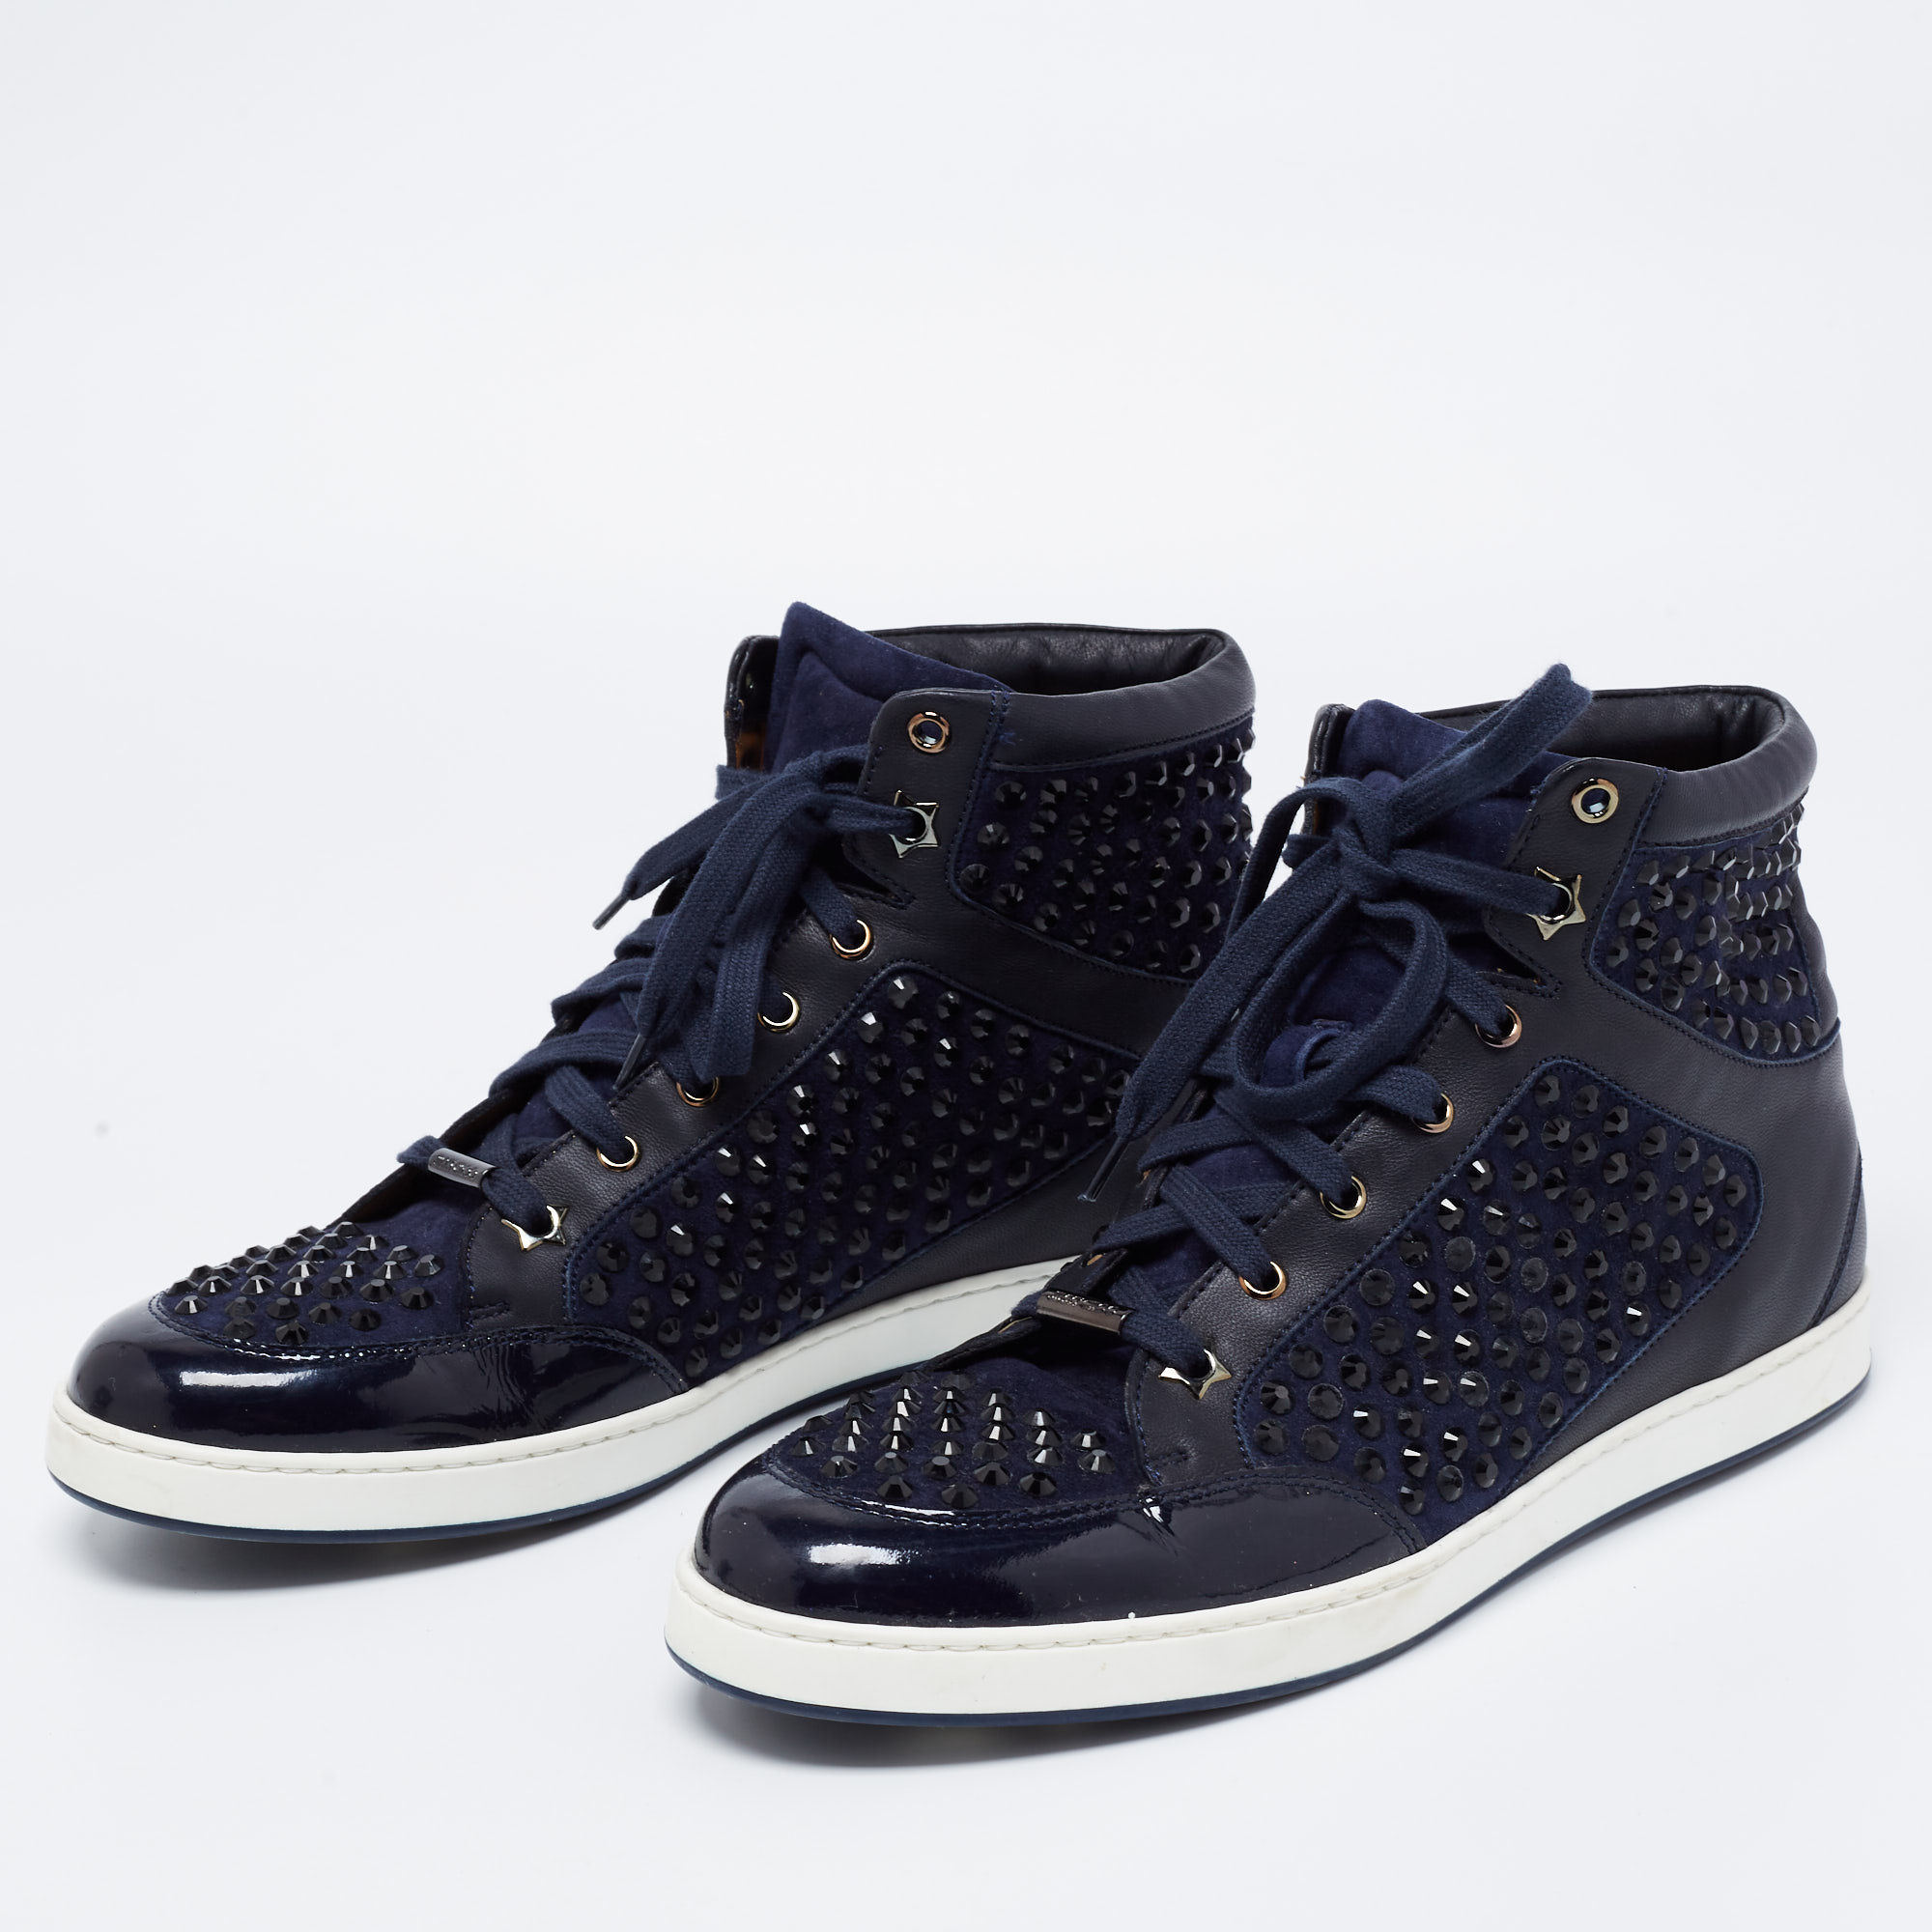 

Jimmy Choo Navy Blue Leather and Suede Studded Tokyo High-Top Sneakers Size